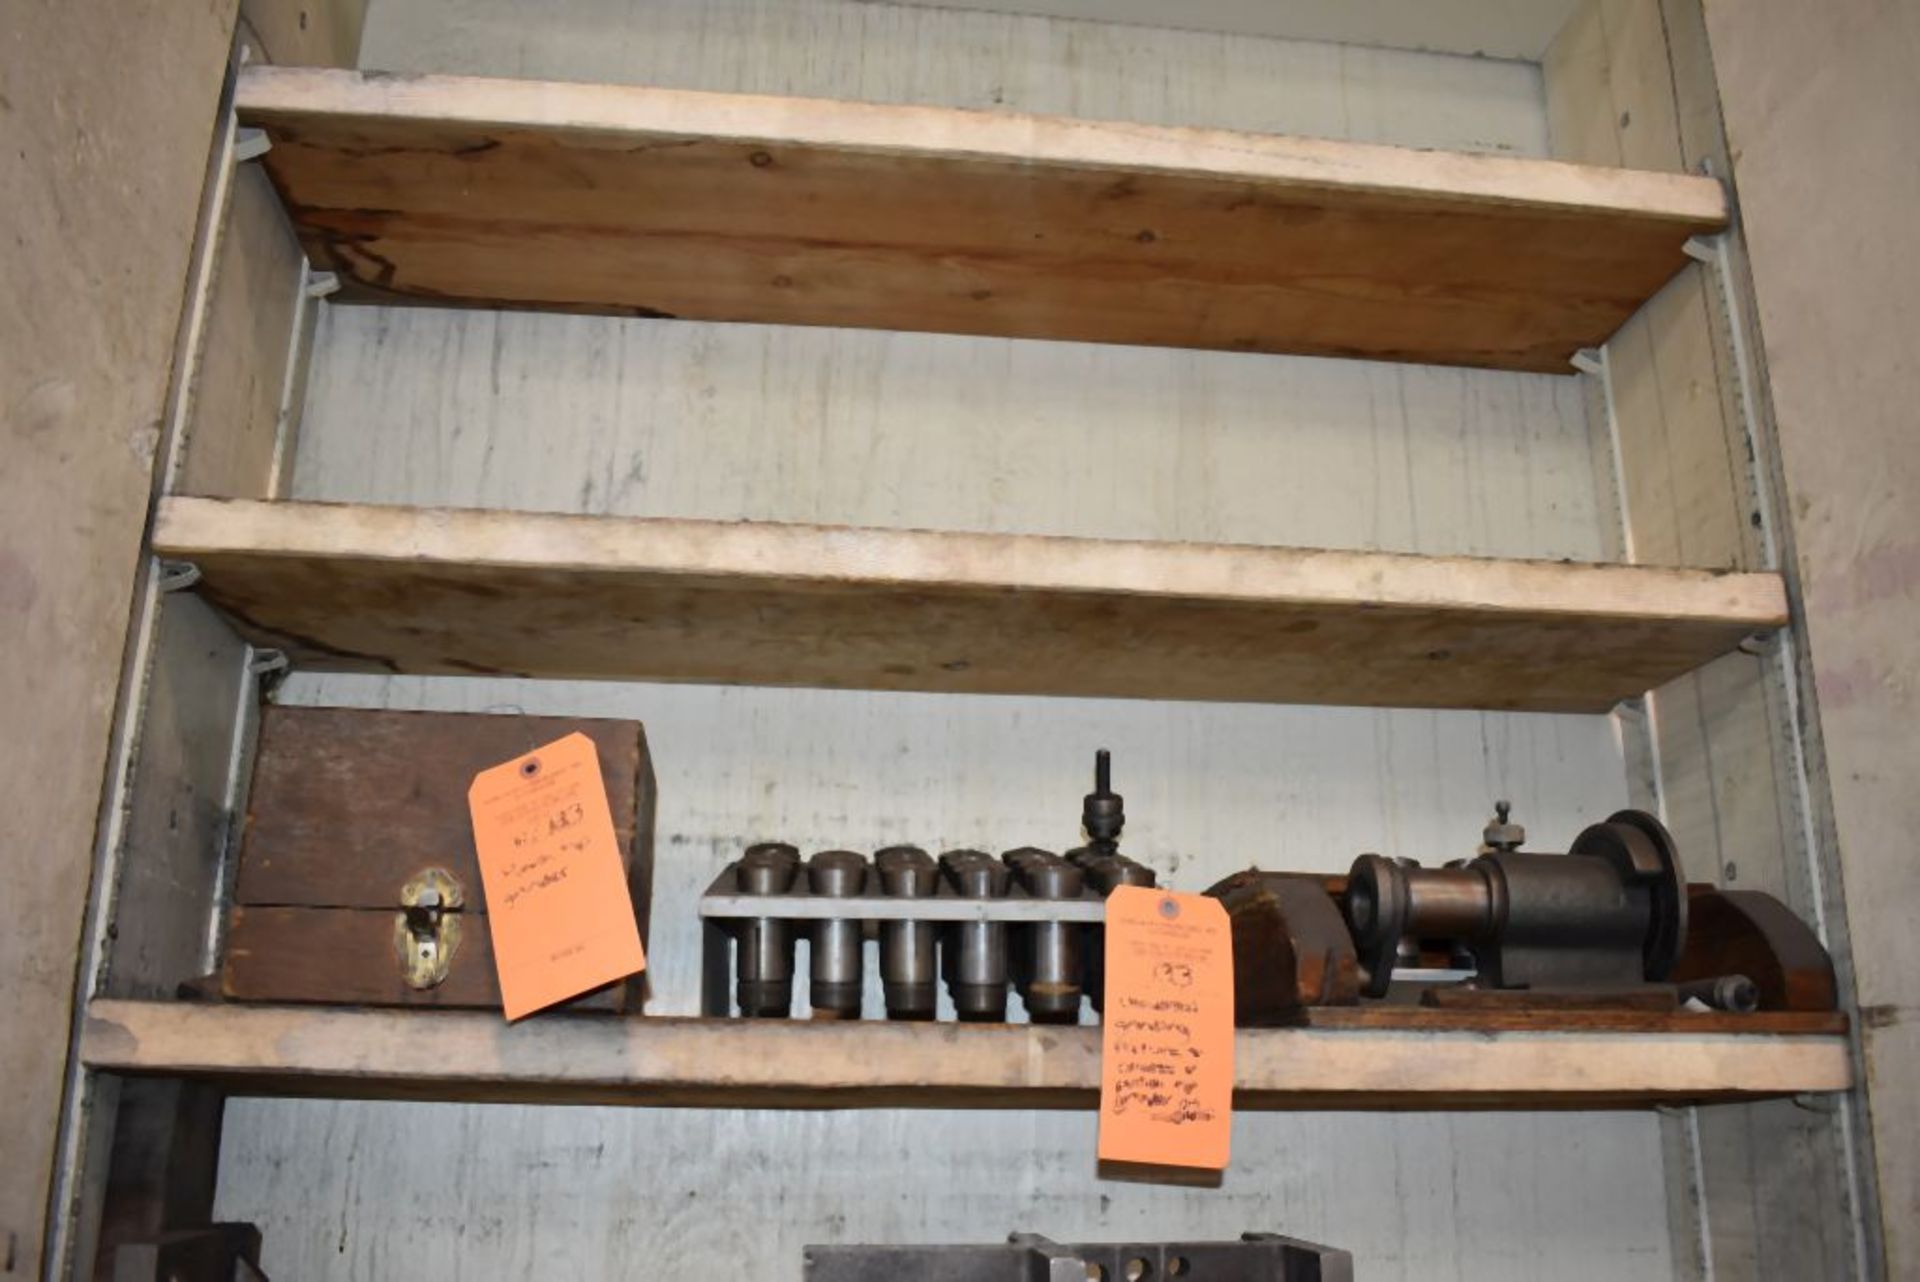 UNIVERSAL GRINDING FIXTURE, COLLETS AND PUNCH TIP GRINDER ON THIS SHELF